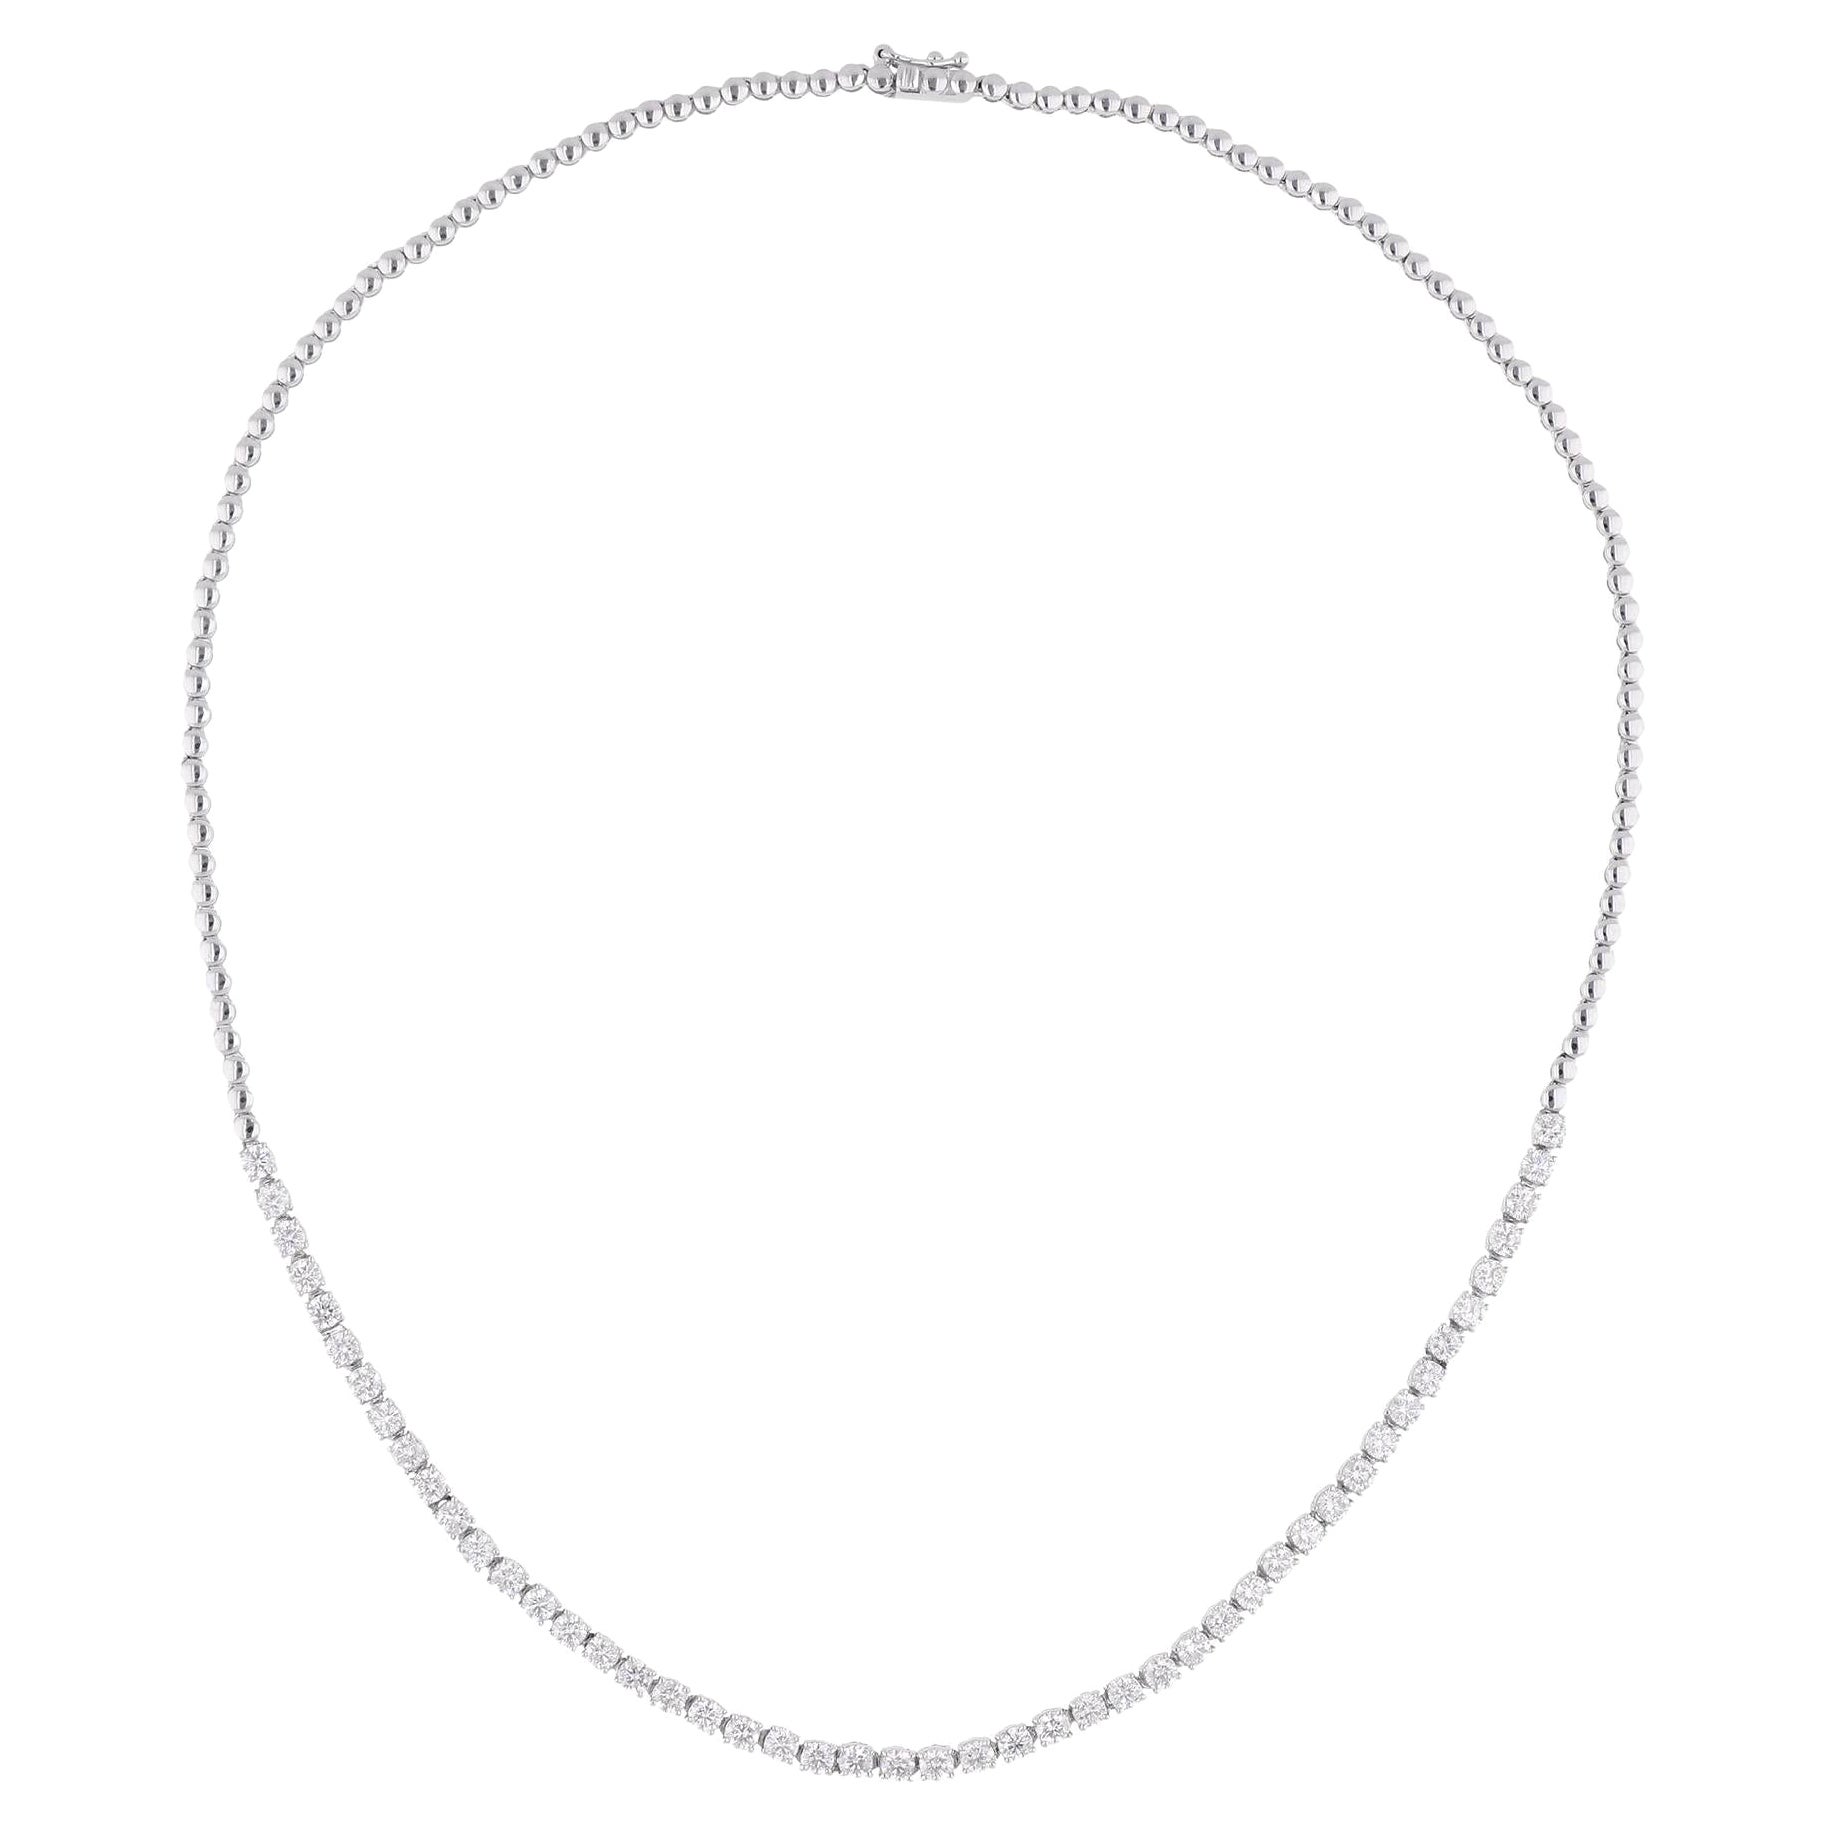 Natural 3.81 Carat Round Diamond Necklace Solid 14 Karat White Gold Fine Jewelry For Sale